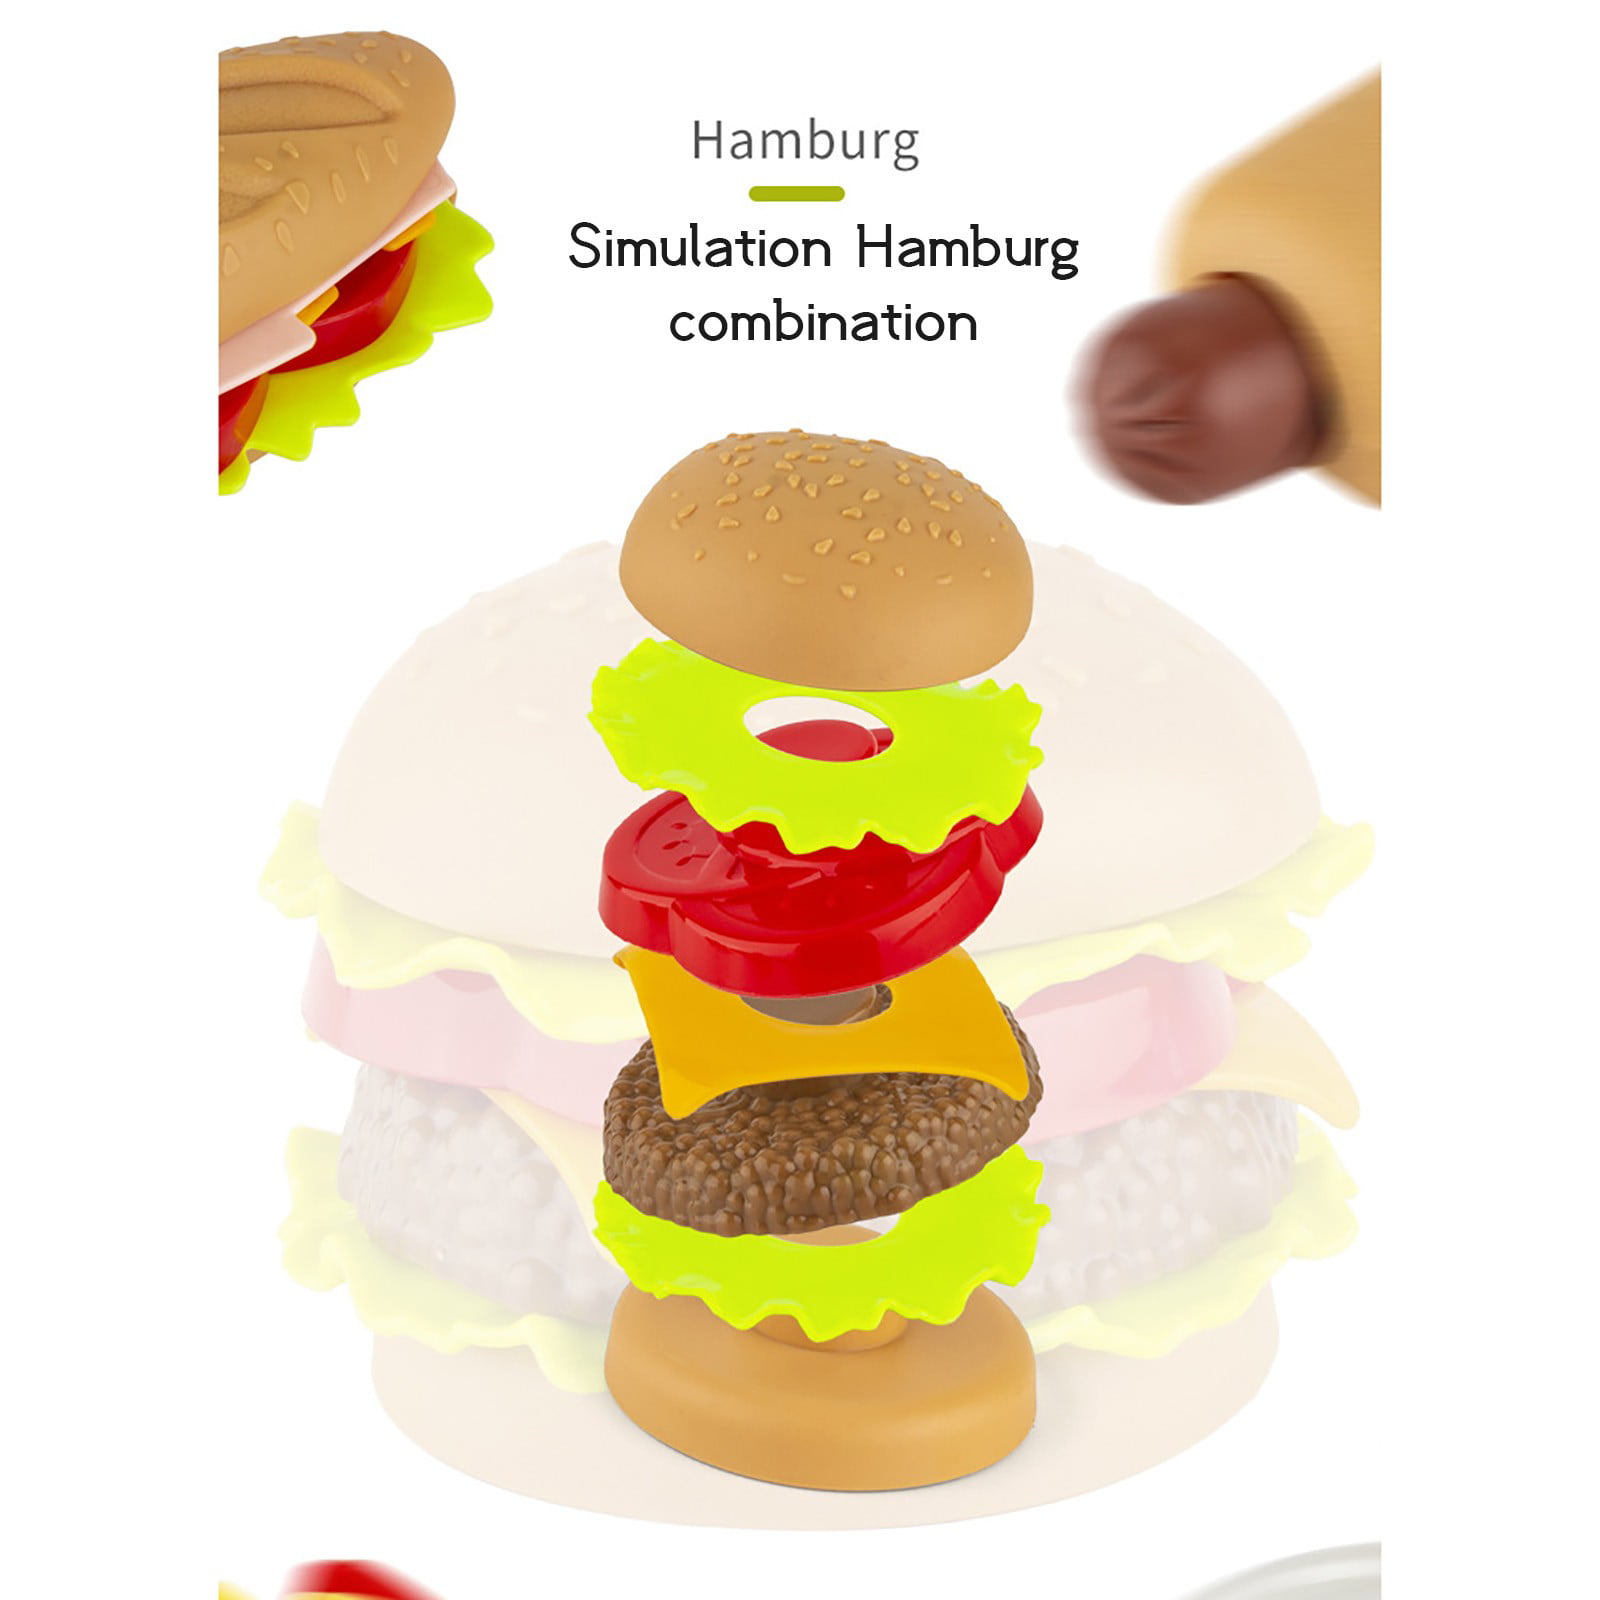 Kayannuo Christmas Clearance Toys Food Miniature Pretend Fast Food Play  Toys Set Hamburger Fries Food Accessory Toy For Kids Party Accessory Re